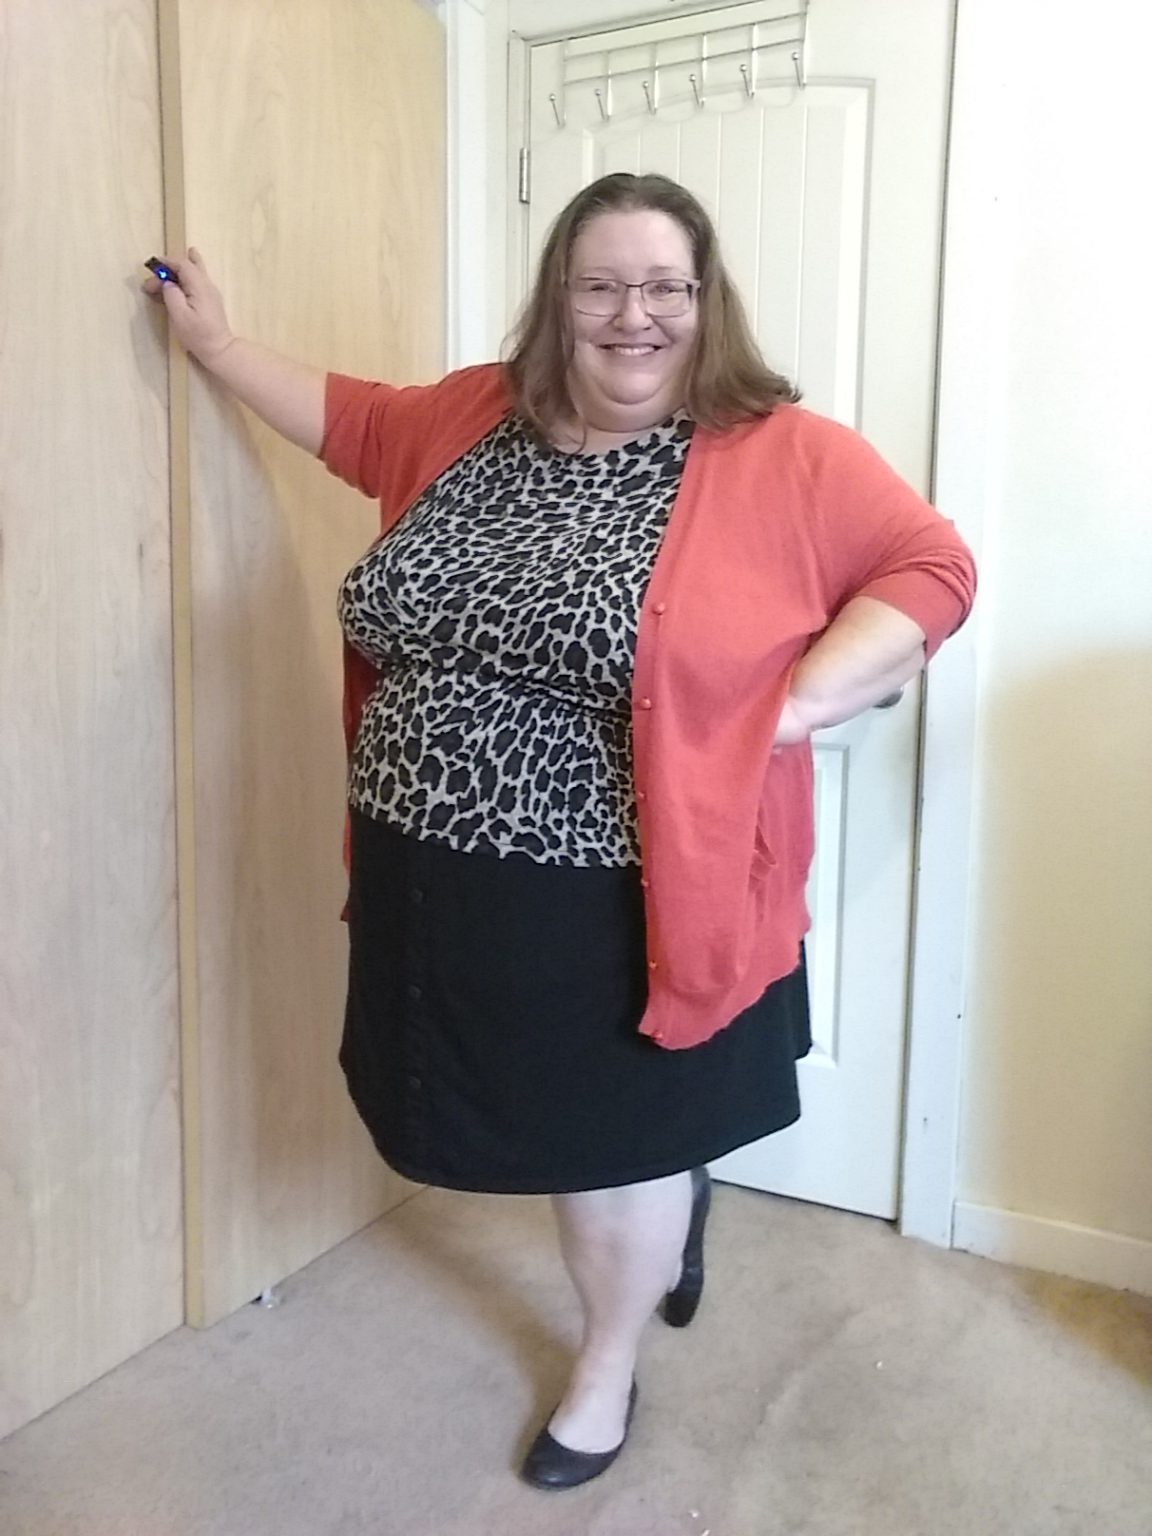 Plus Size Outfits | RhondaLeigh Plus Size Capsule Wardrobe